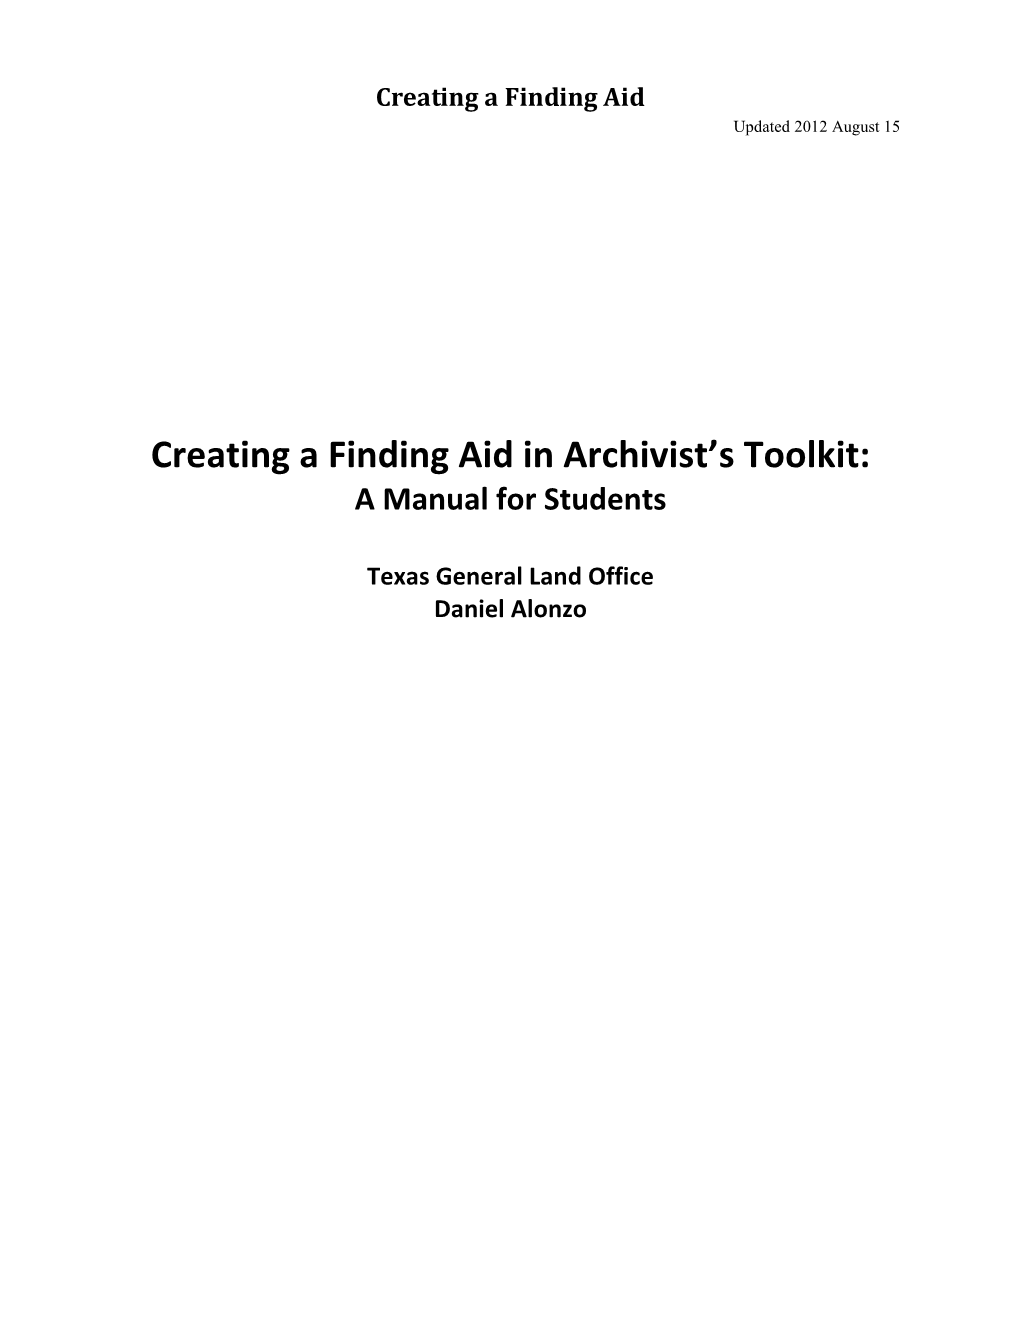 Creating a Finding Aid in Archivists' Toolkit